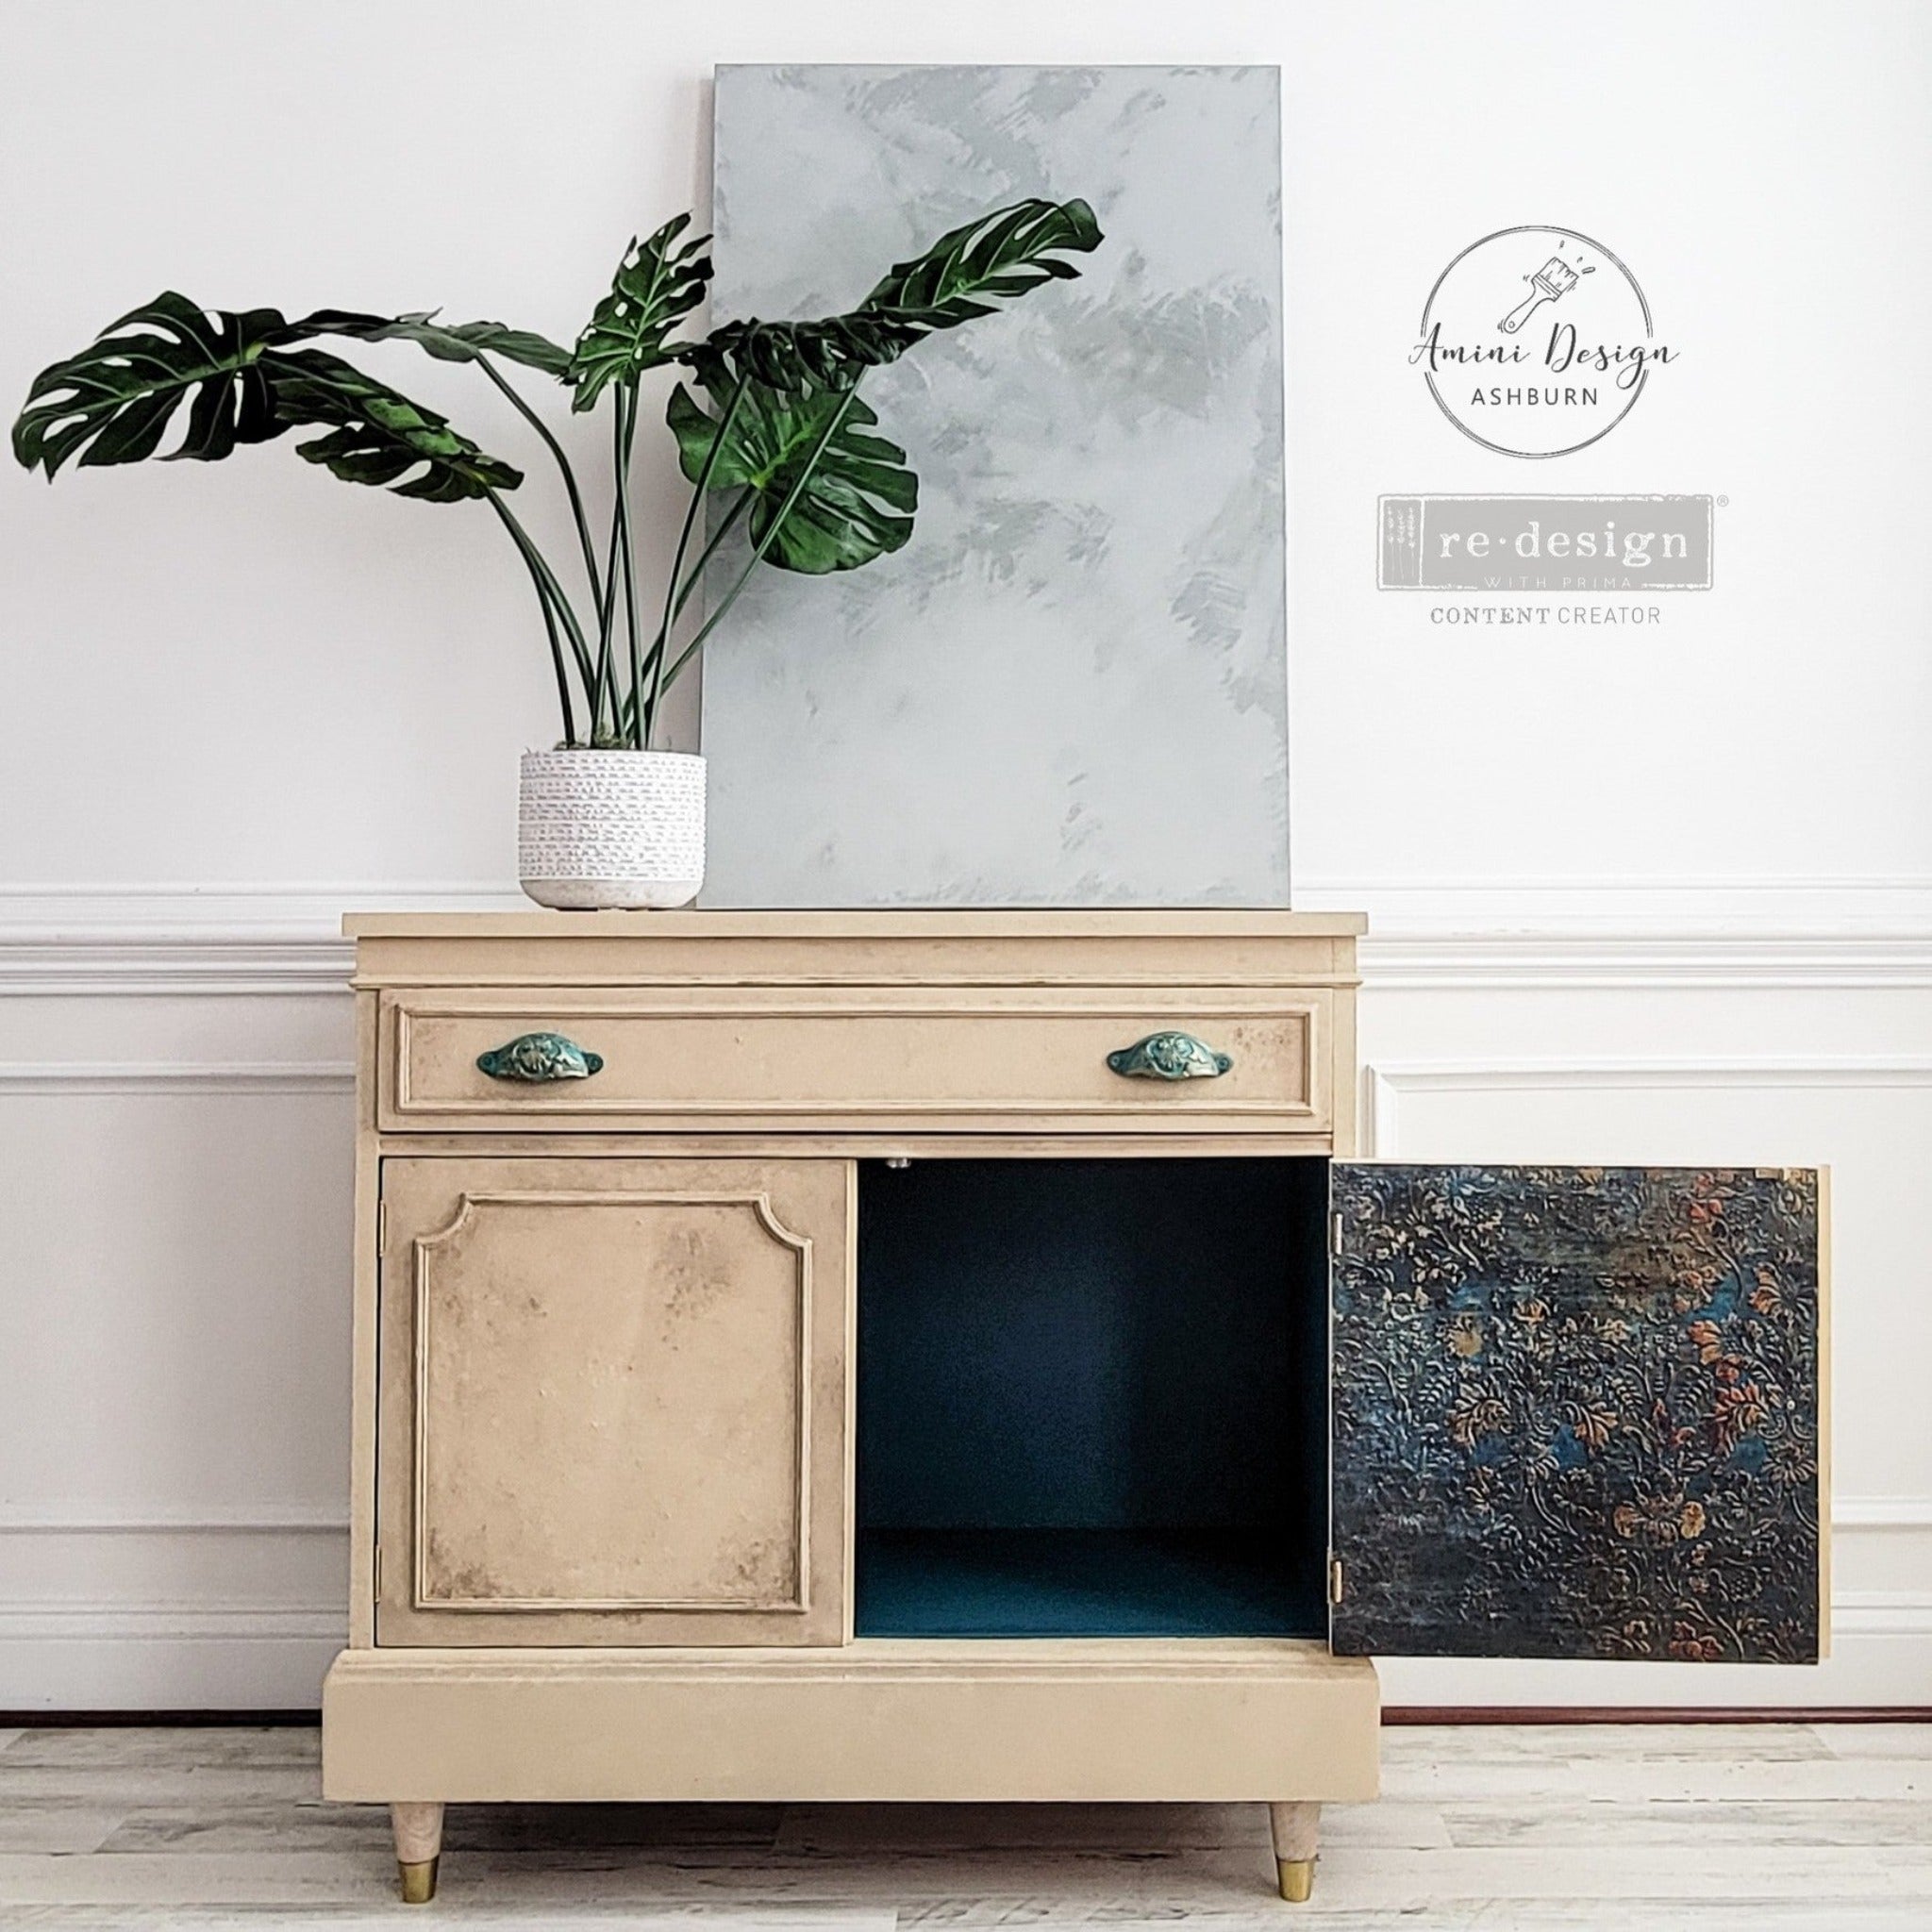 A vintage small console table refurbished by Amini Deisgn Ashburn is painted beige and features ReDesign with Prima's Aged Patina A1 fiber paper inside its doors.